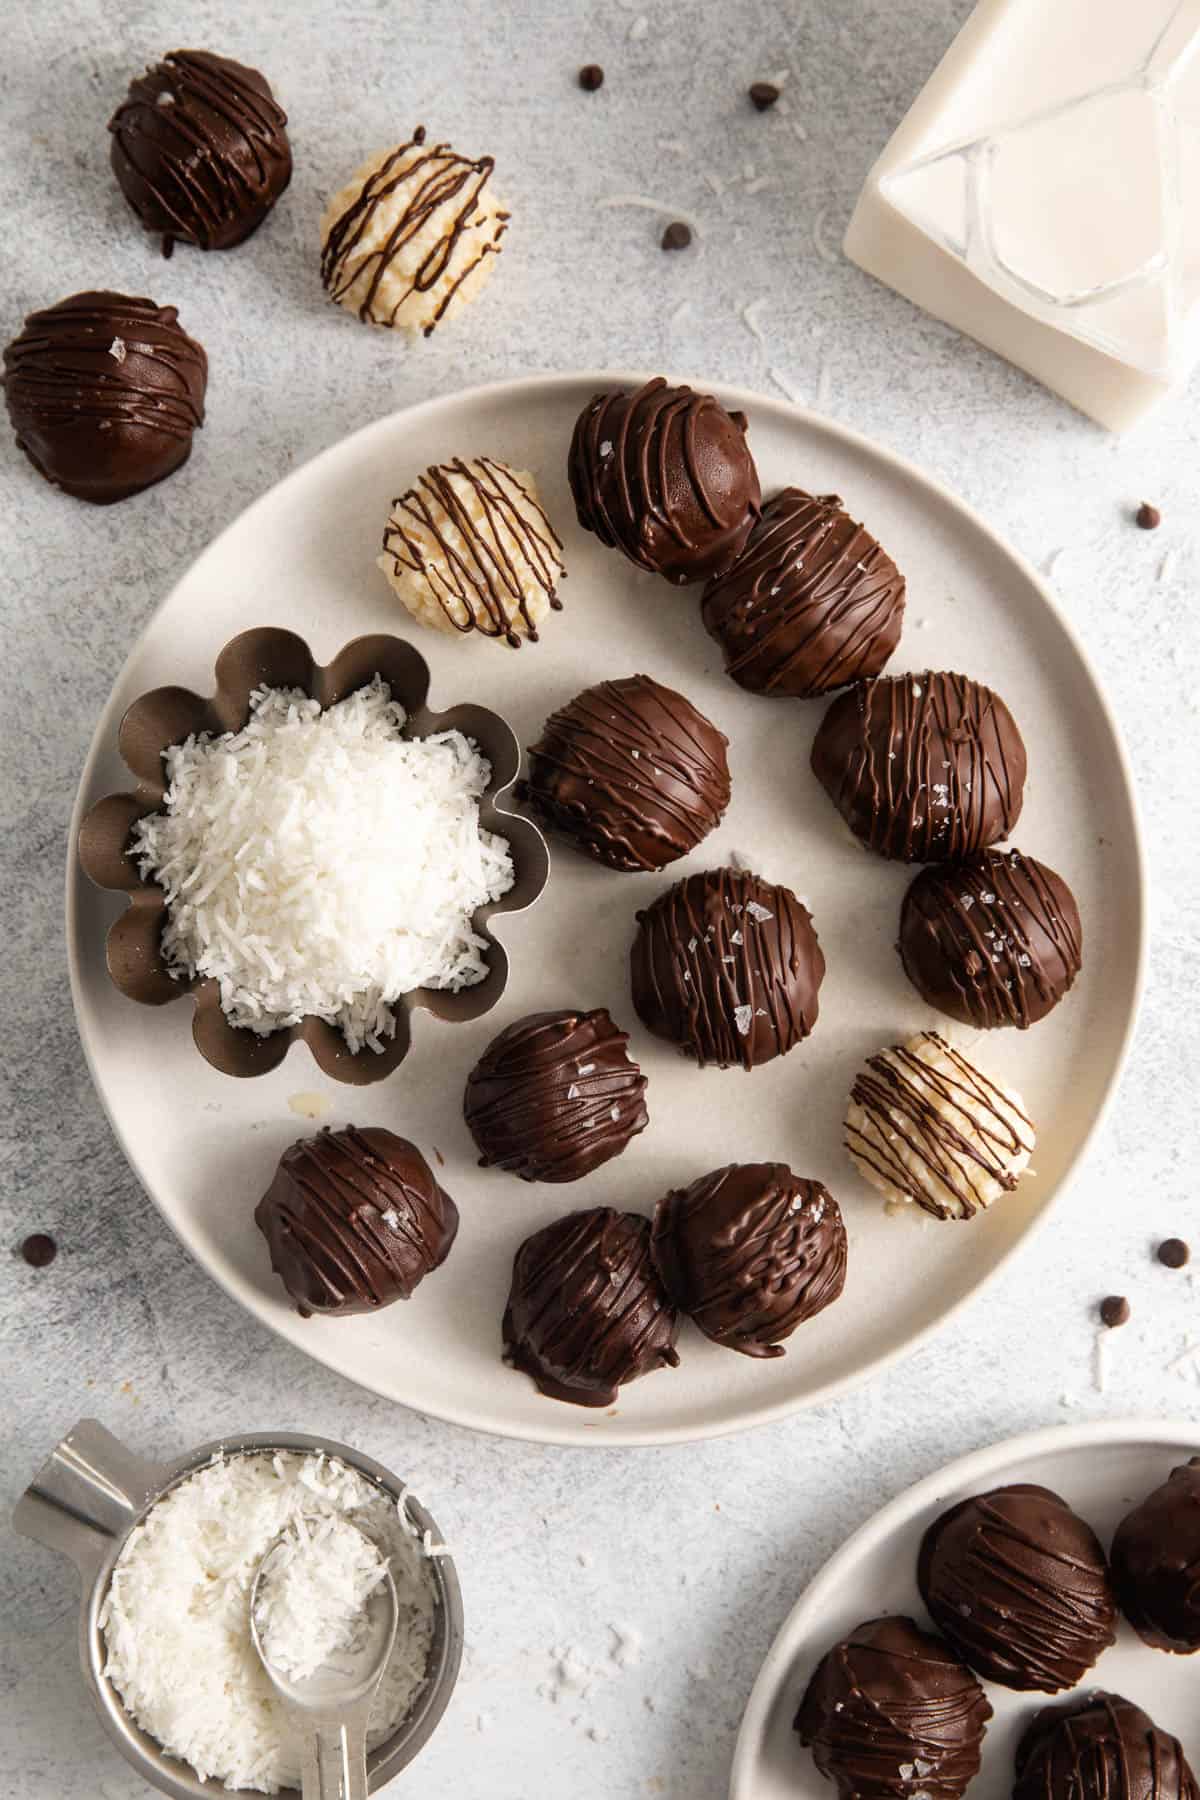 An overhead image of a plate of chocolate coconut balls that have been decorated with drizzled chocolate.